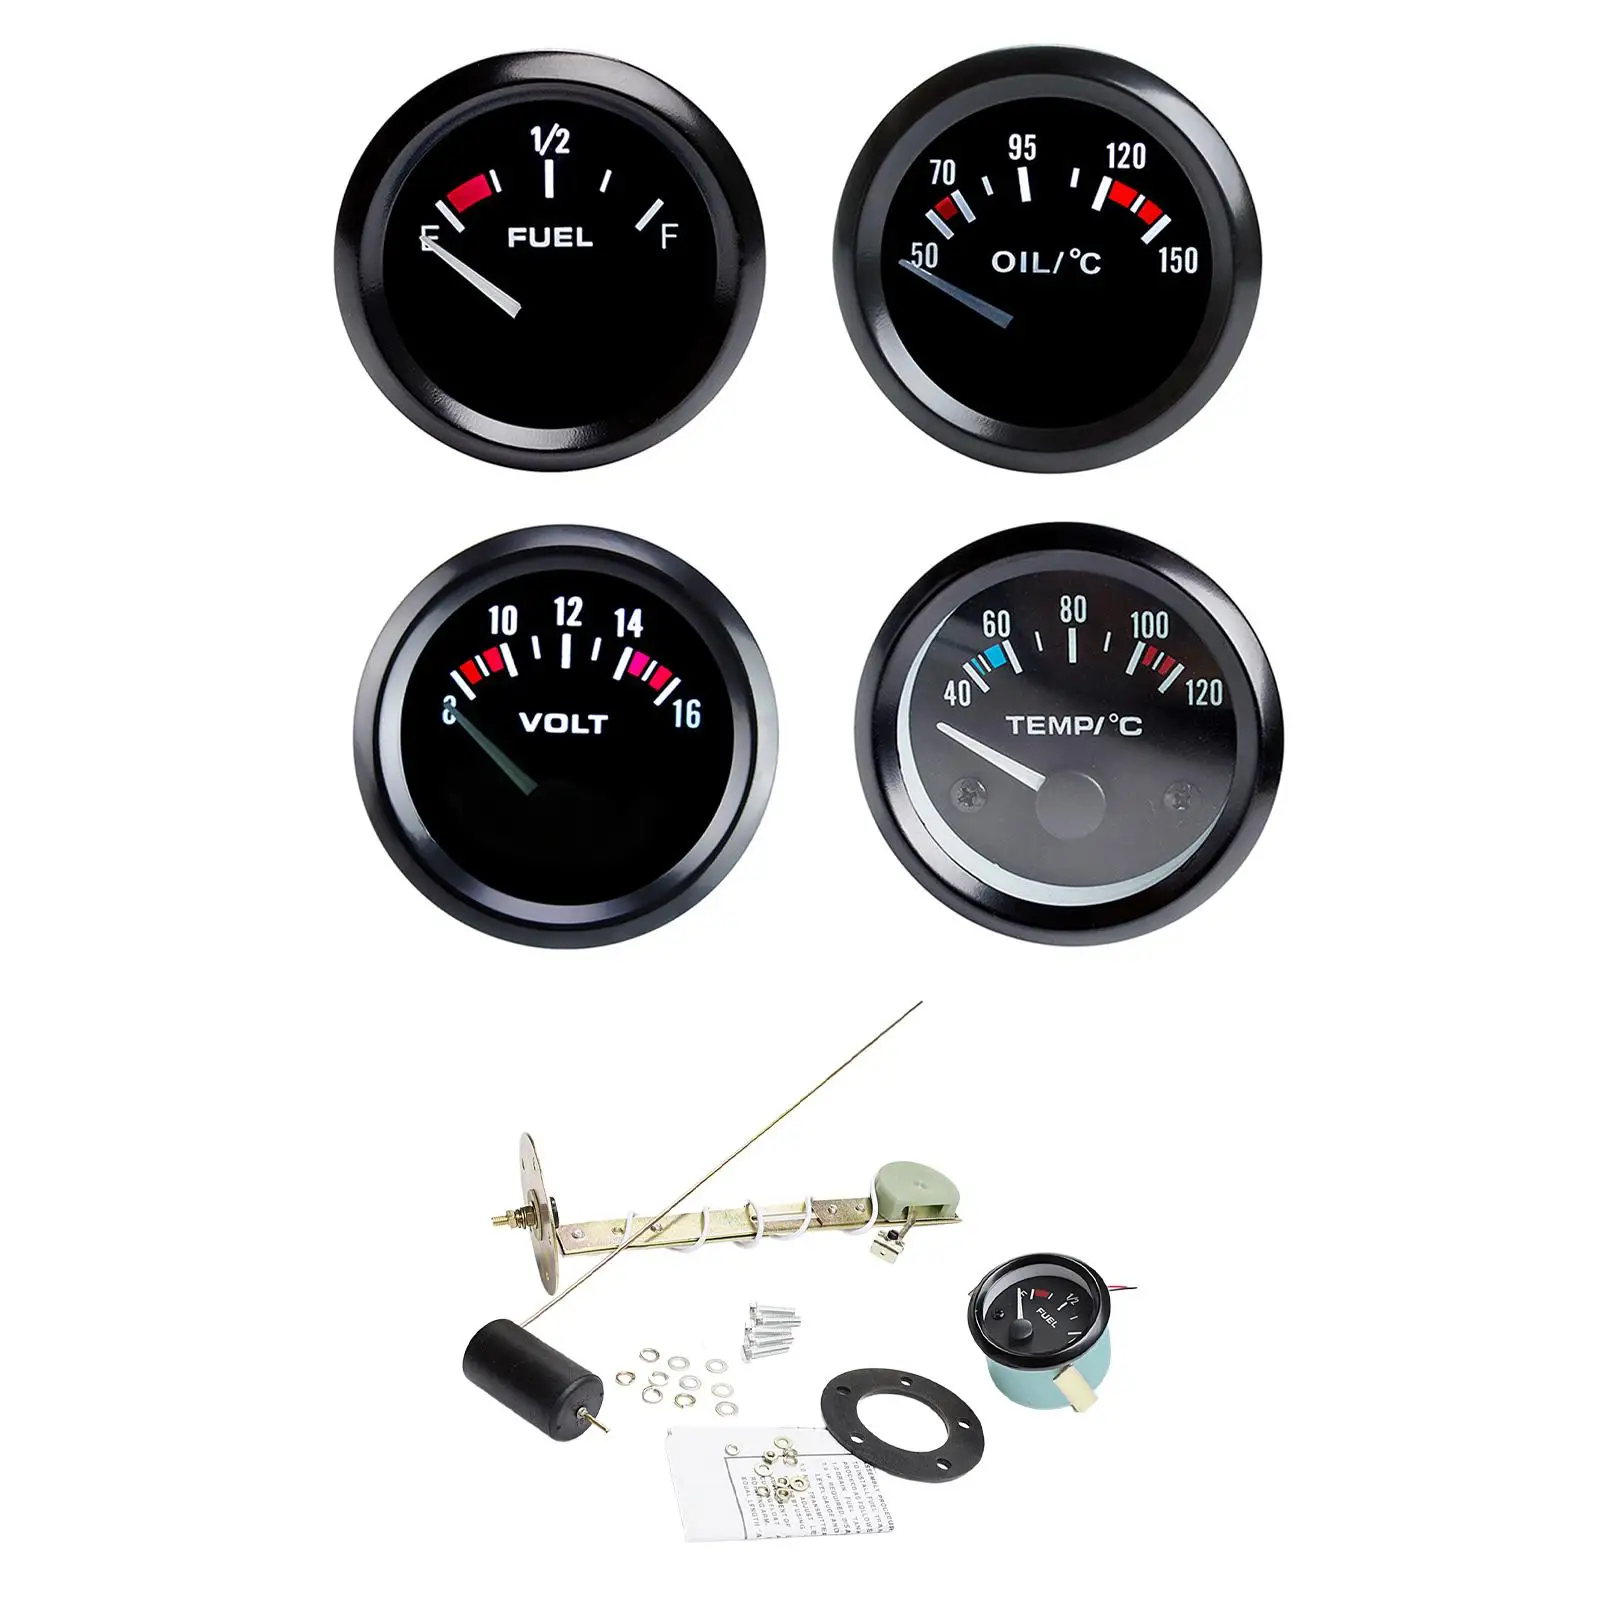 Fuel Gauge Universal Racing Instrument Panel LED Display Adjustable 2 inch 52mm for Replaces Premium Spare Parts Durable